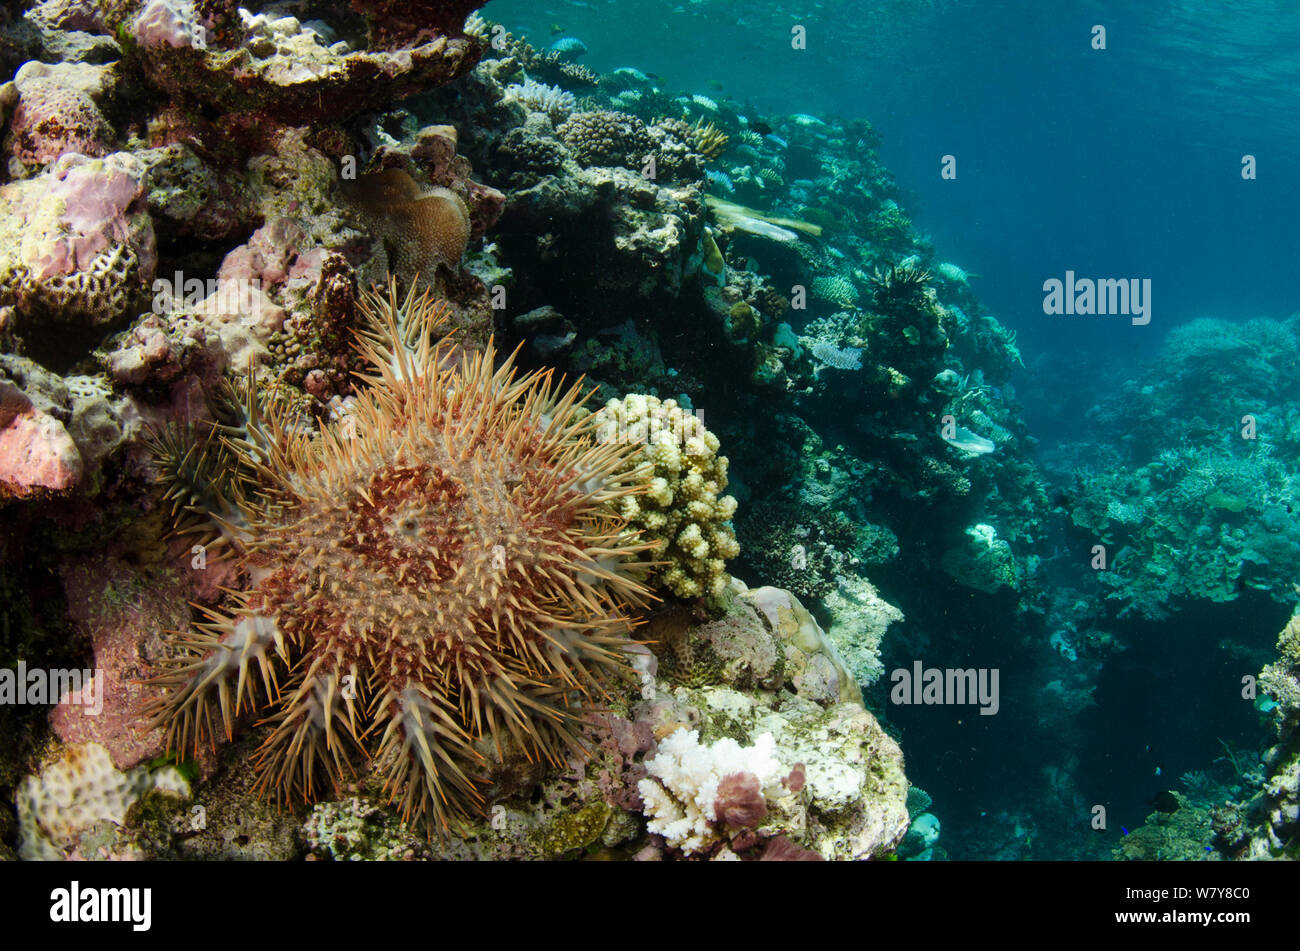 Crown-of-thorns sea star (Acanthaster planci) on coral reef. Koro Island, Fiji, South Pacific. Stock Photo